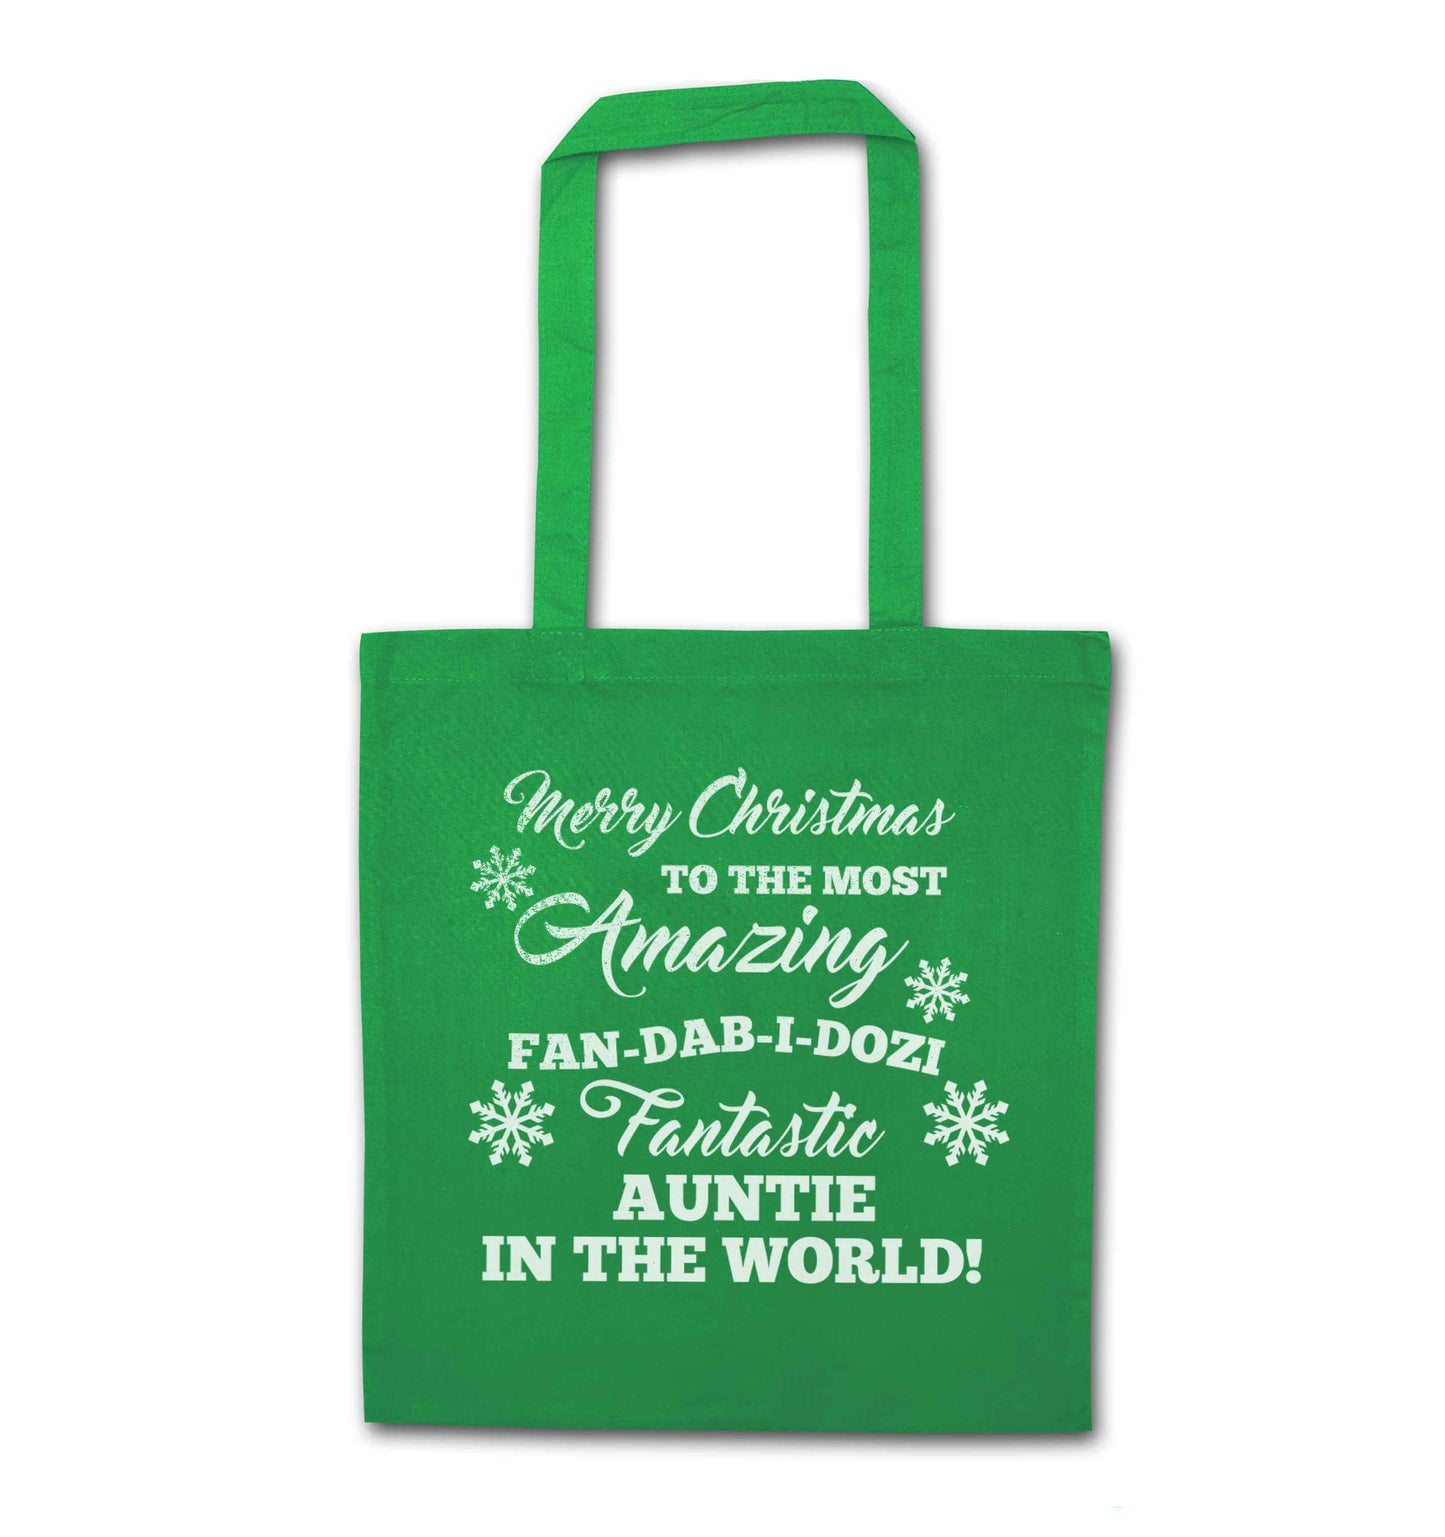 Merry Christmas to the most amazing fan-dab-i-dozi fantasic Auntie in the world green tote bag